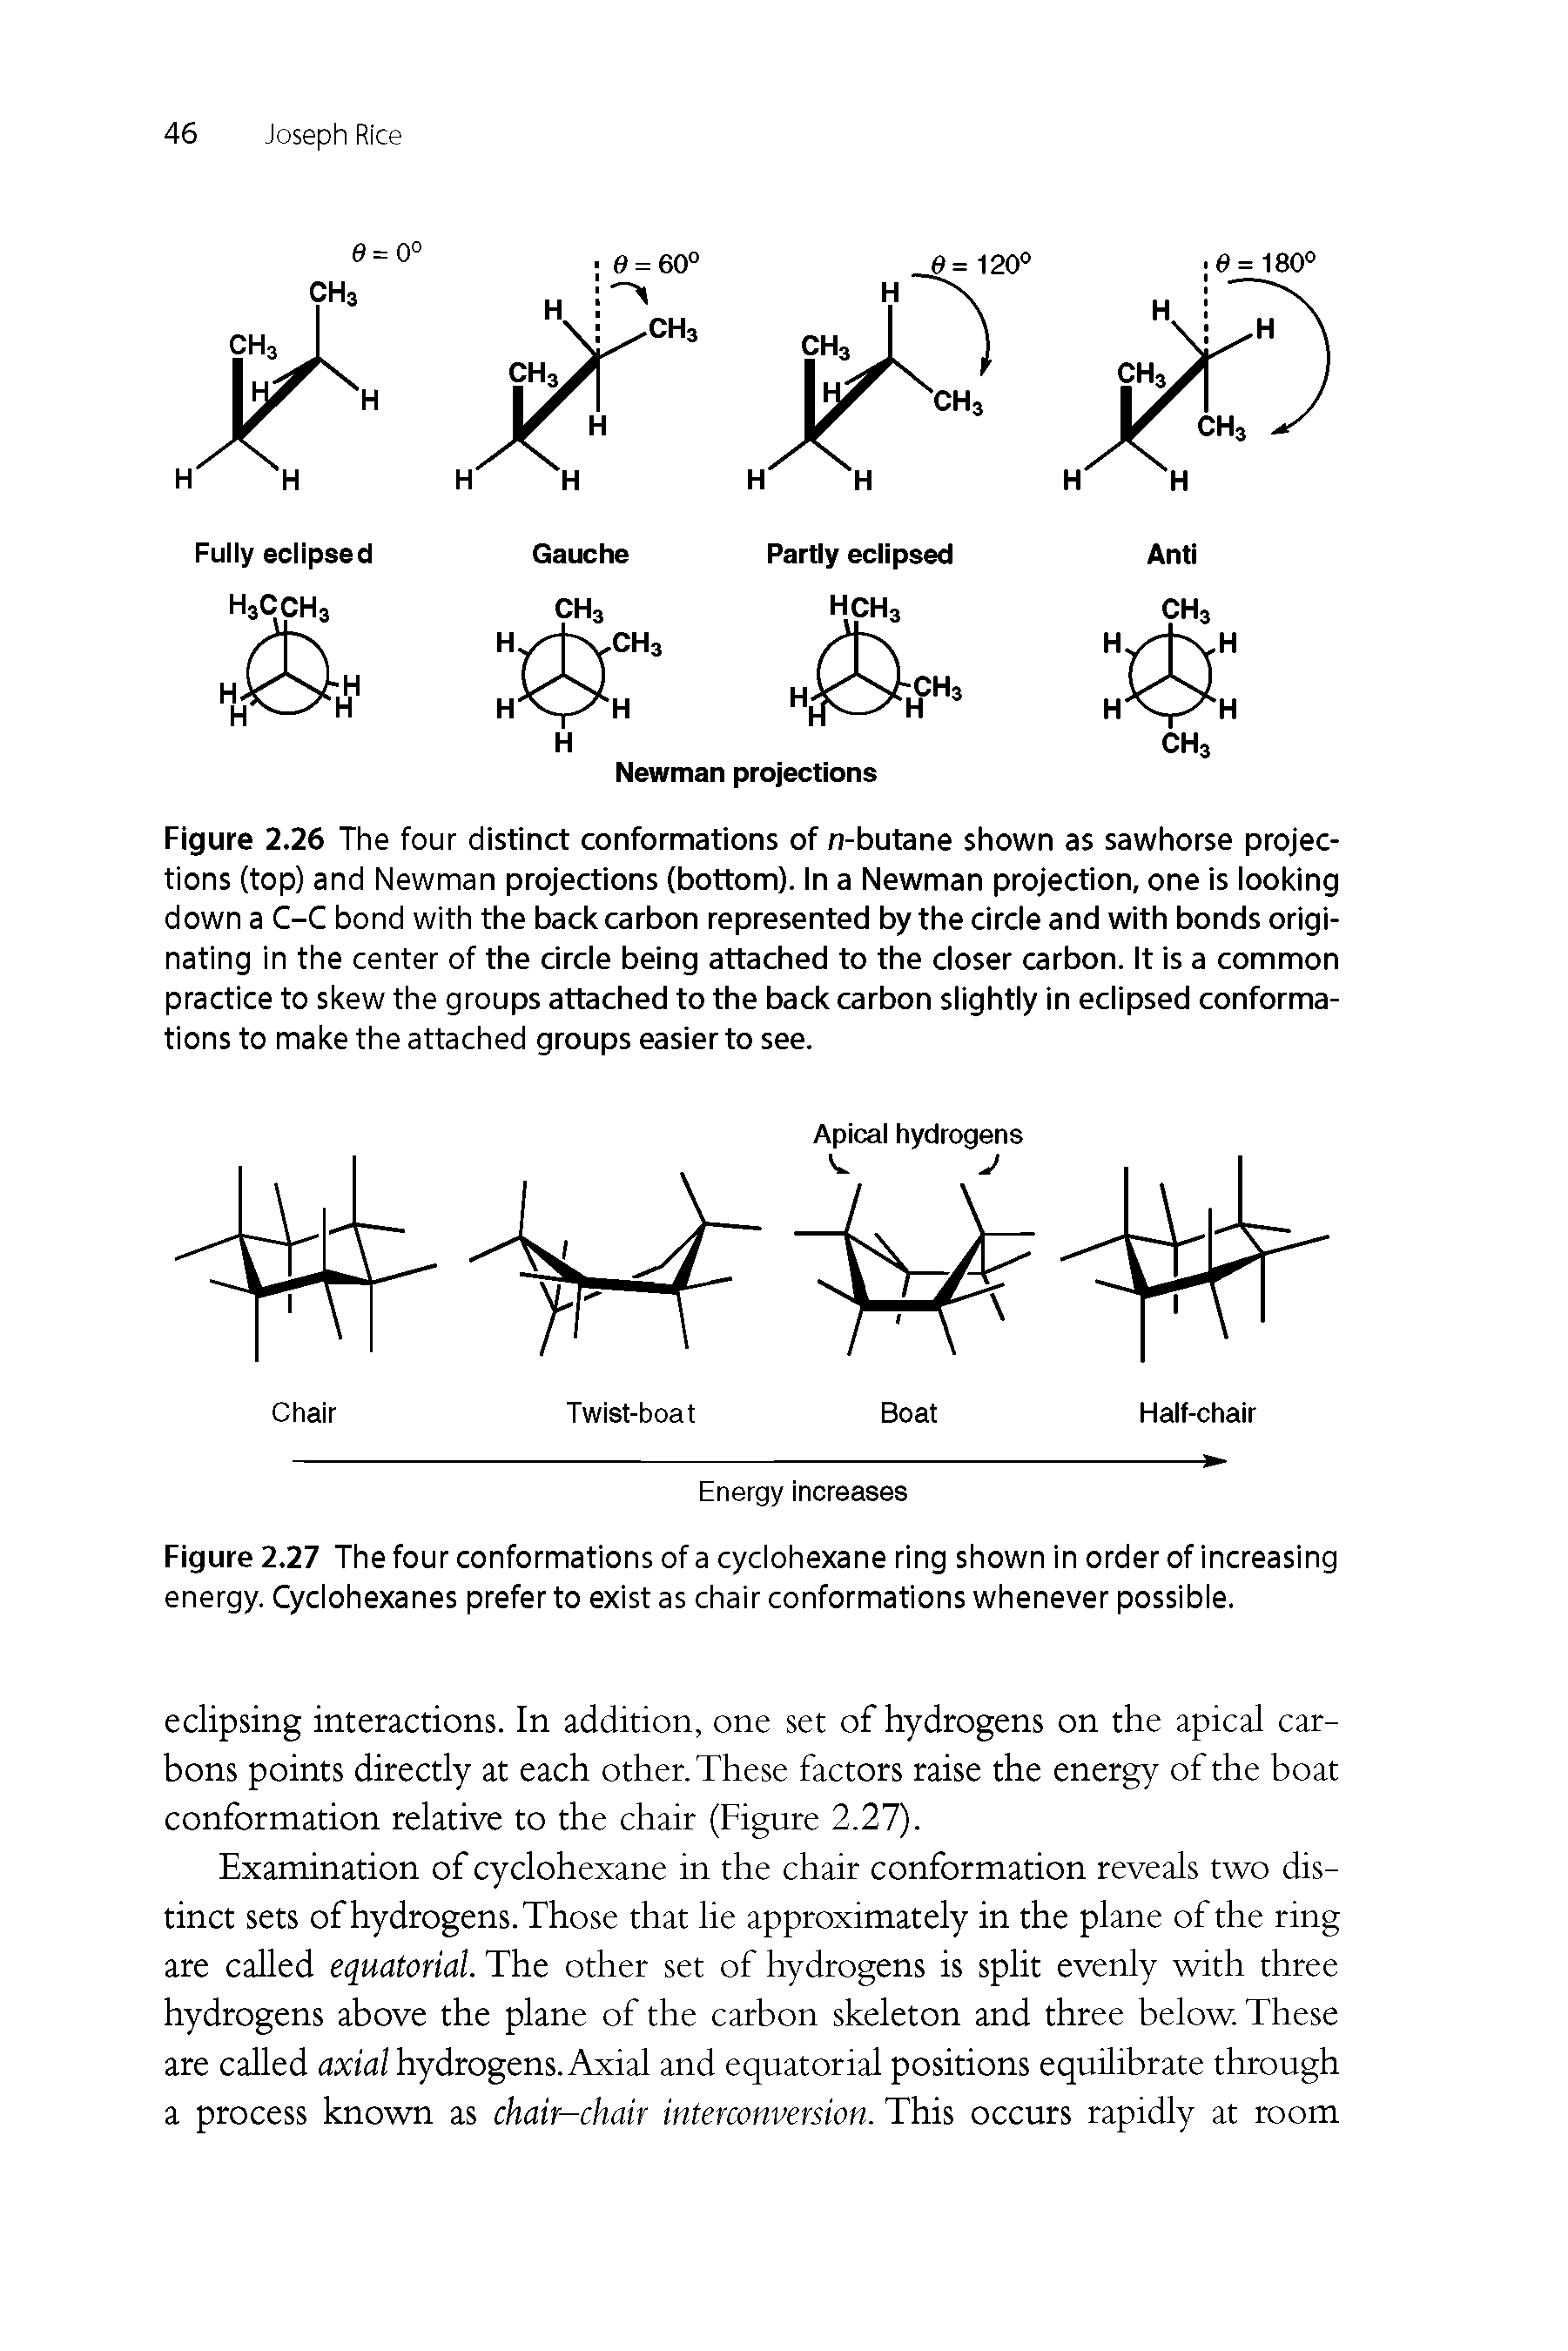 Figure 2.27 The four conformations of a cyclohexane ring shown in order of increasing energy. Cyclohexanes prefer to exist as chair conformations whenever possible.